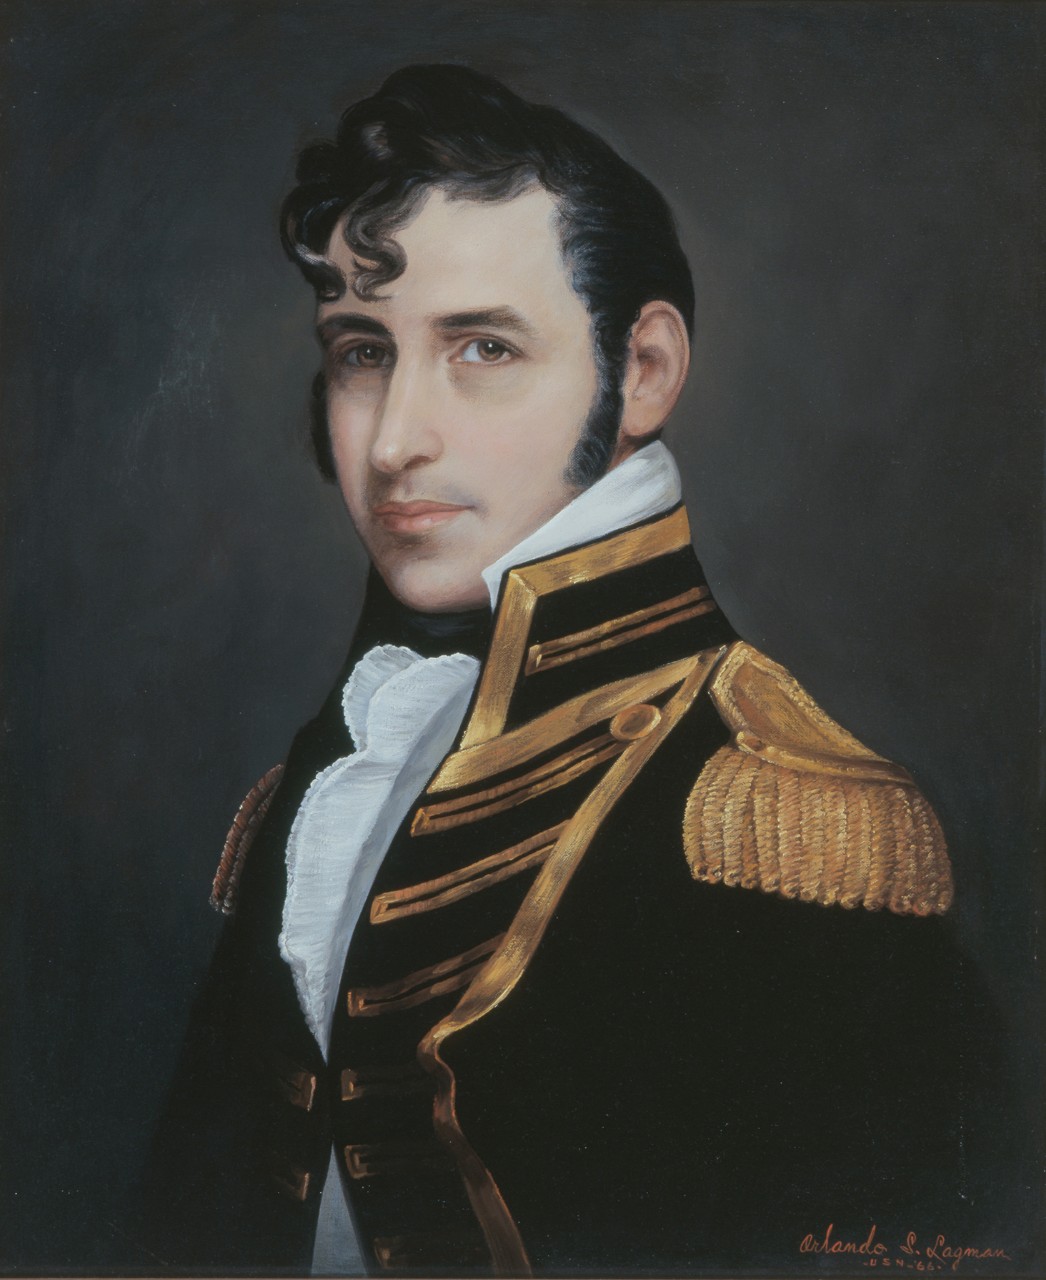 Protrait of Stephen Decatur in an early 19th century uniform